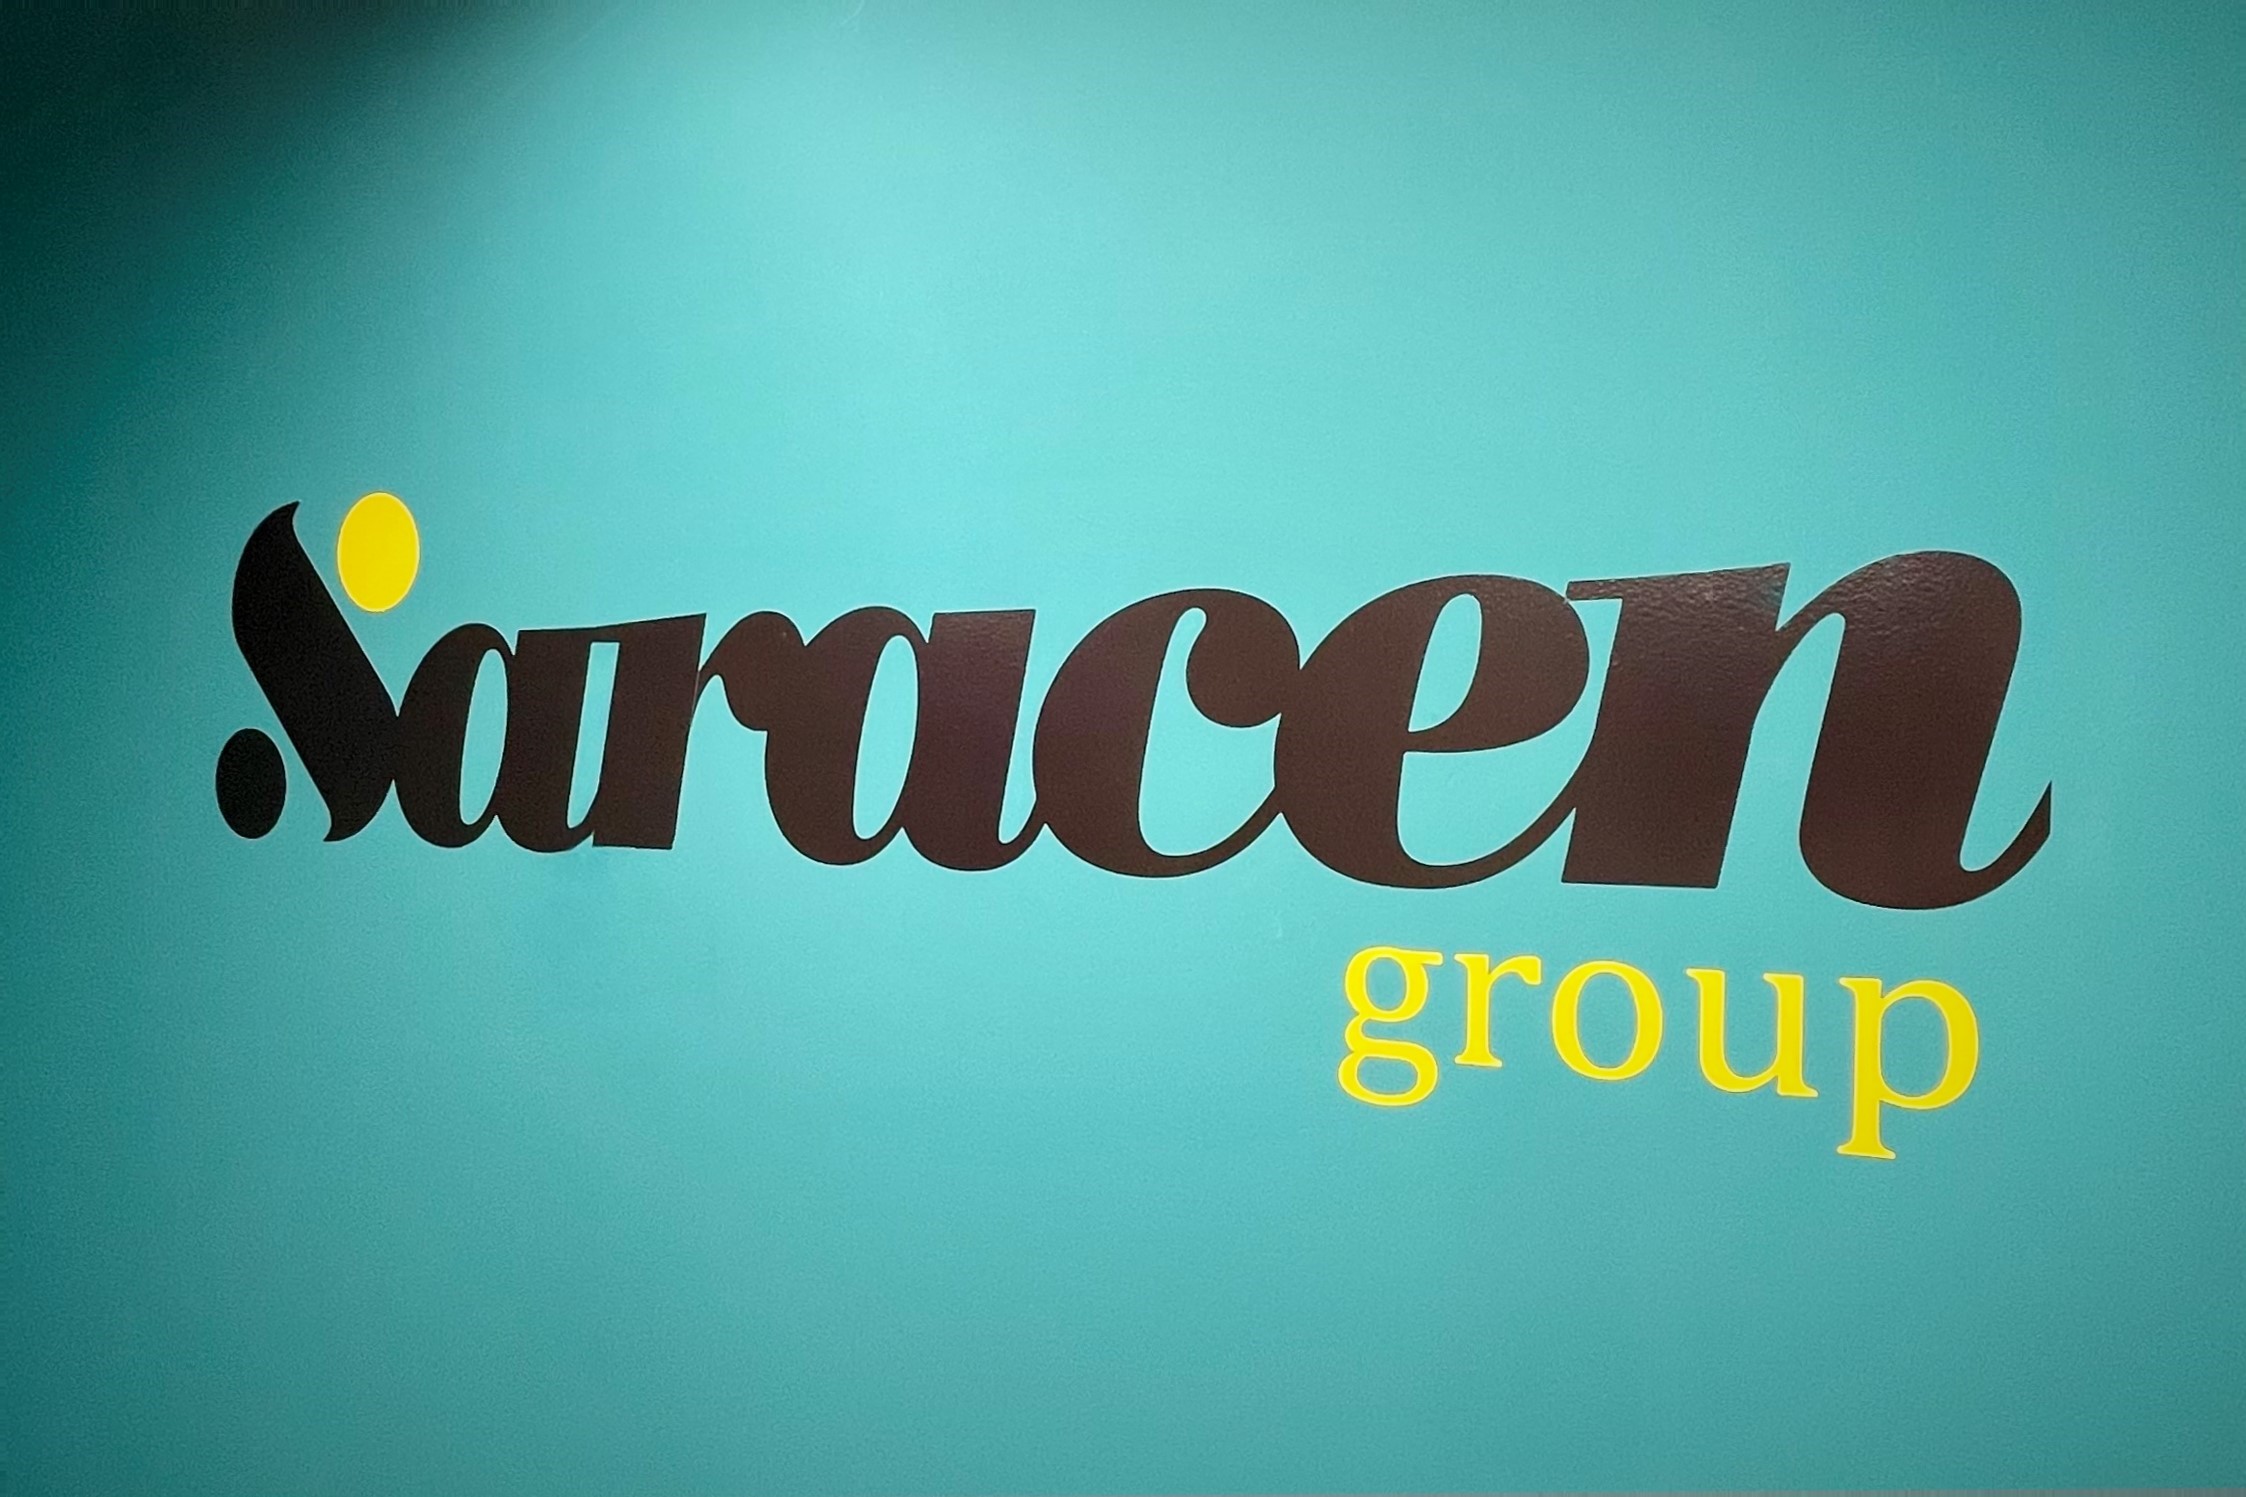 Why Should You Choose Saracen to Manage Your Project?